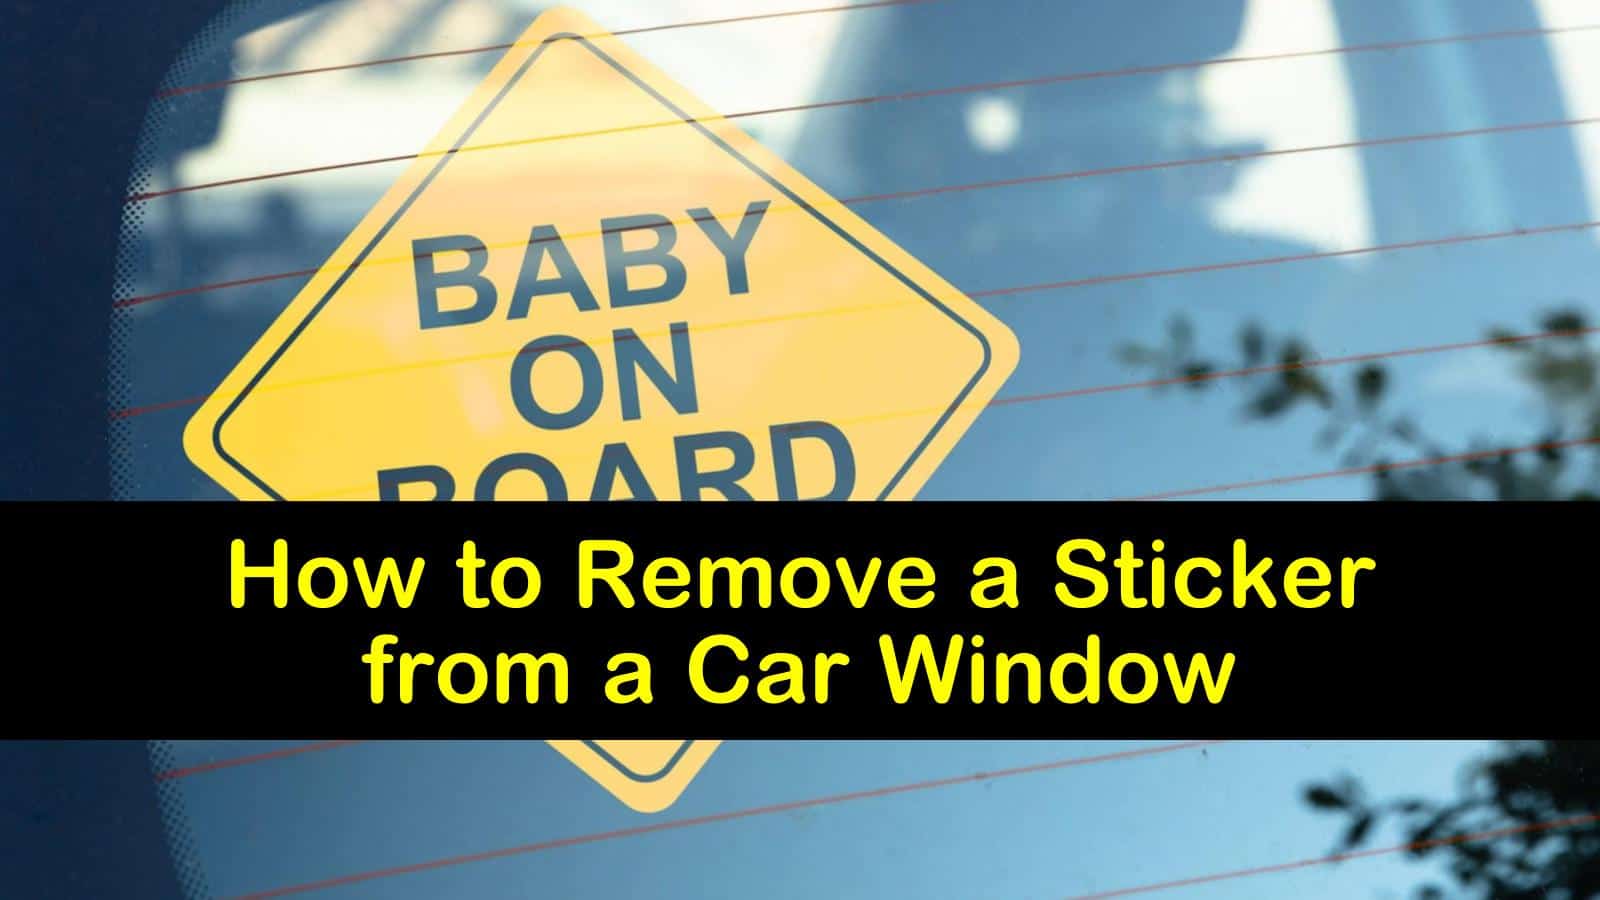 how to remove a sticker from a car window titleimg1